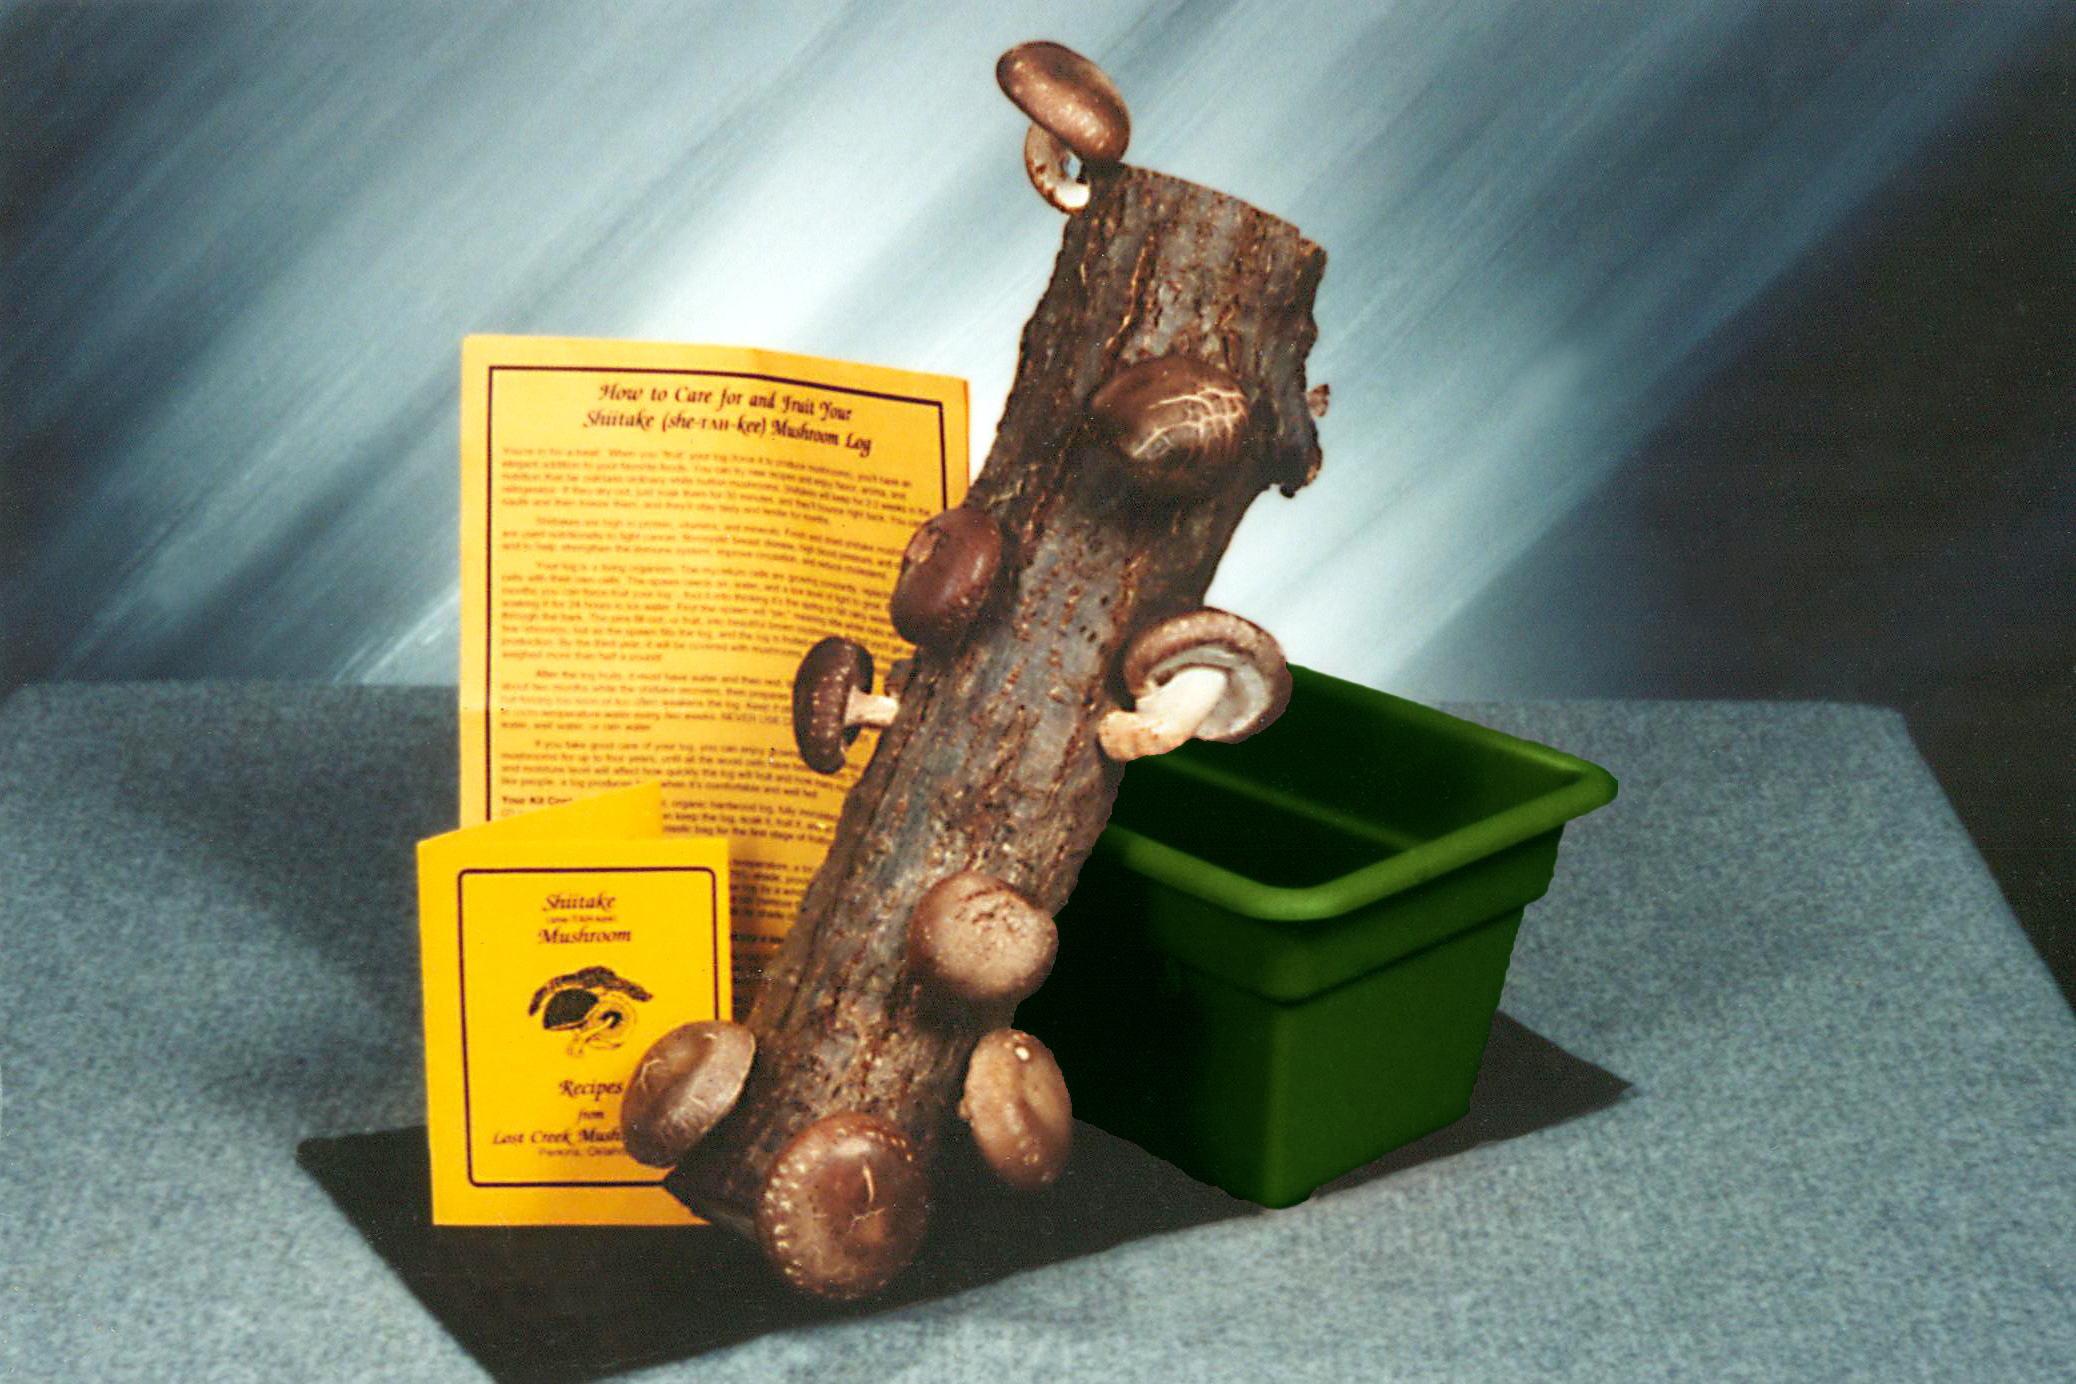 Shiitake Log Kit with Tray $50. Best Buy: 2 kits shipped to the same address, $90. Buy one for a gift, keep one for yourself.